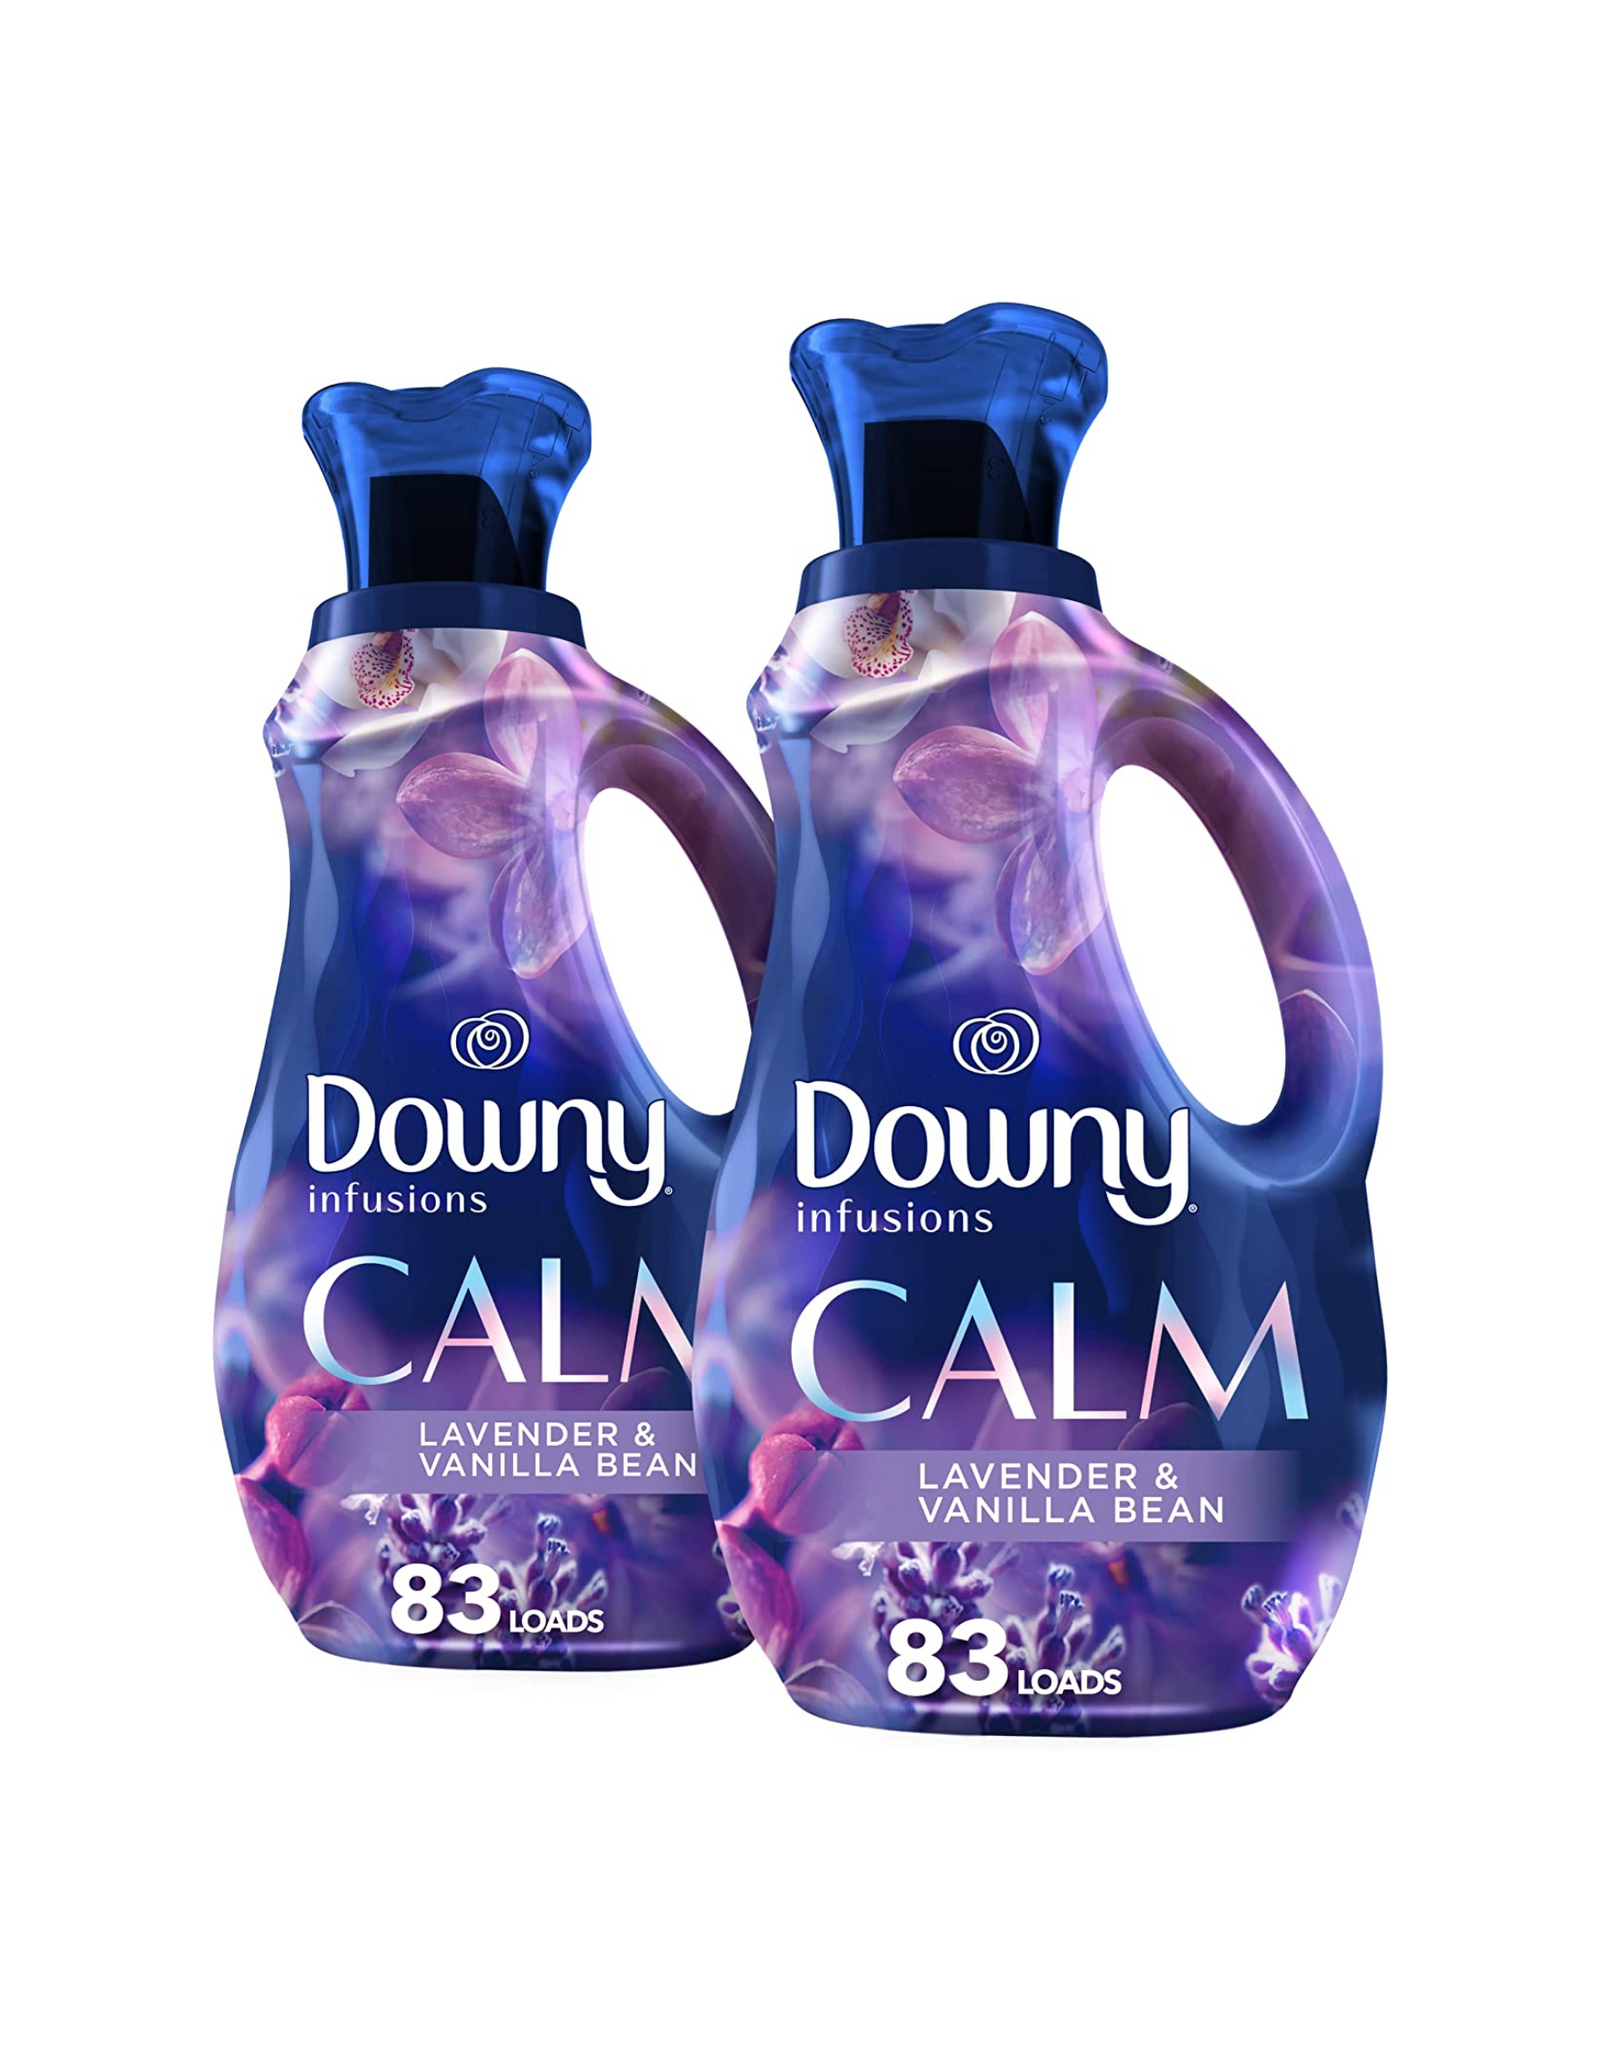 Downy Infusions Laundry Fabric Softener Liquid, Calm Scent, Lavender & Vanilla Bean, 166 Total Loads (Pack of 2)